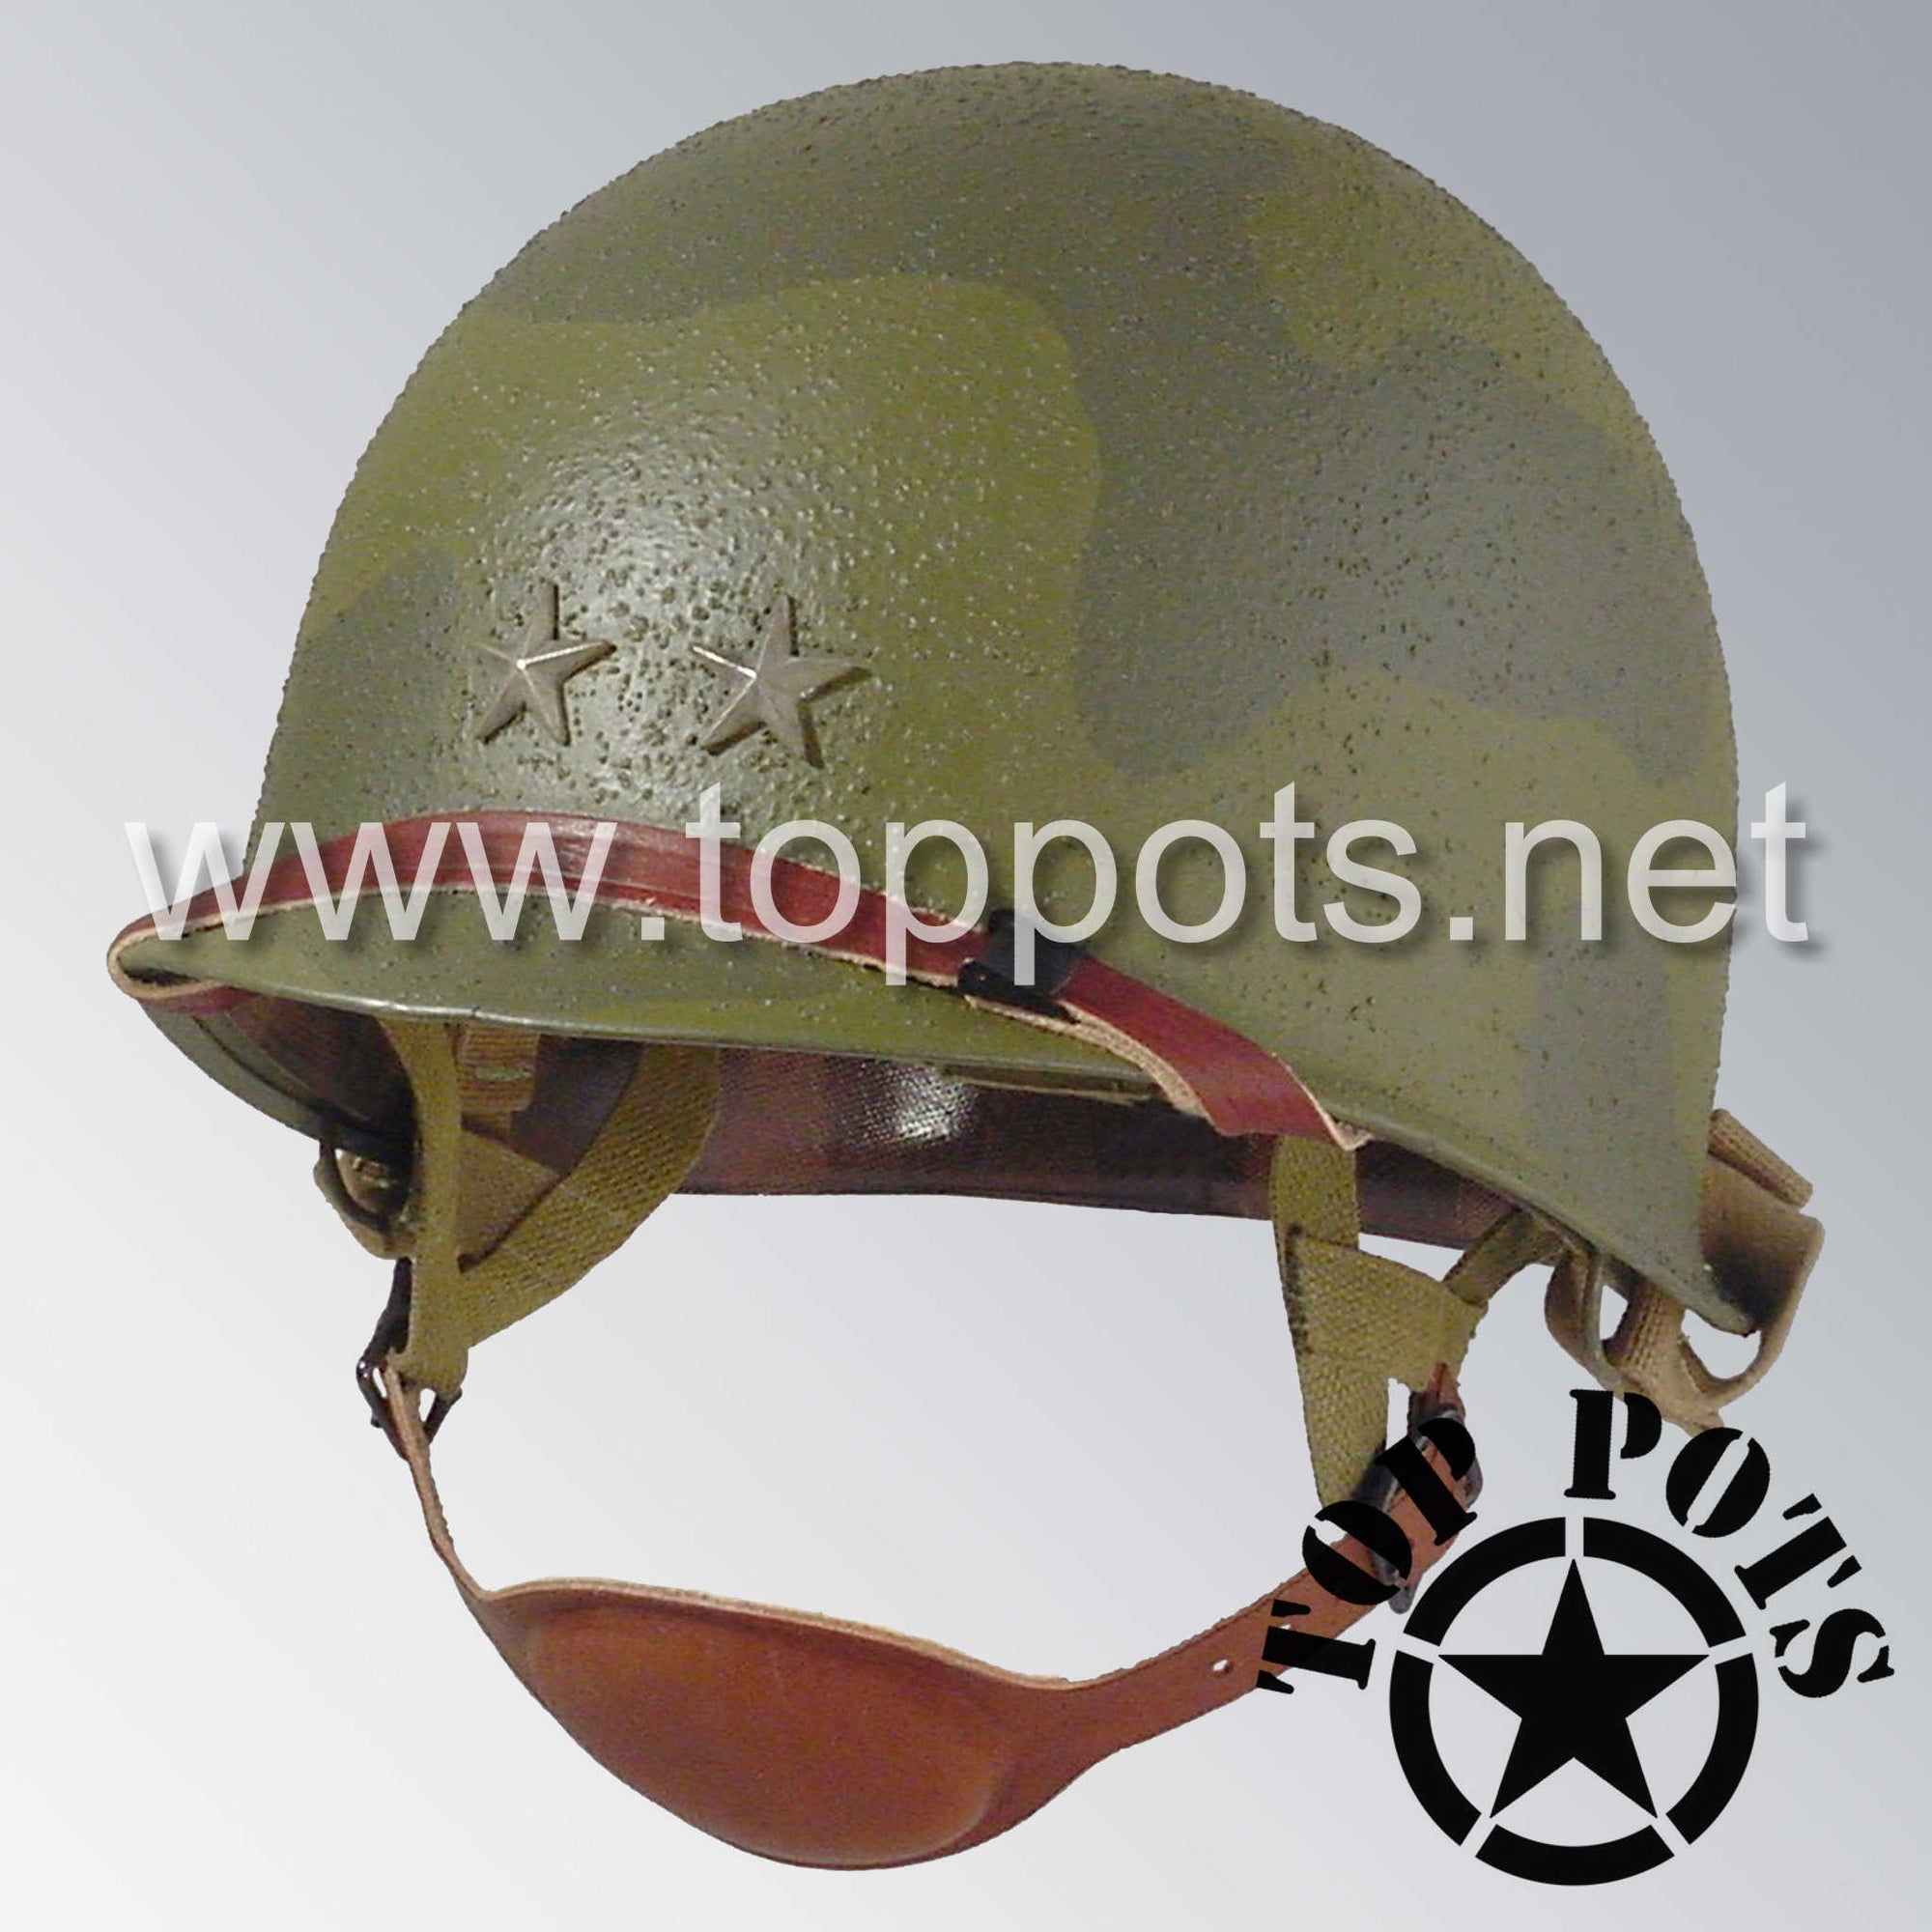 WWII US Army Restored Original M2 Paratrooper Airborne Helmet D Bale Shell and Liner with General Ridgeway 82nd Airborne Emblem